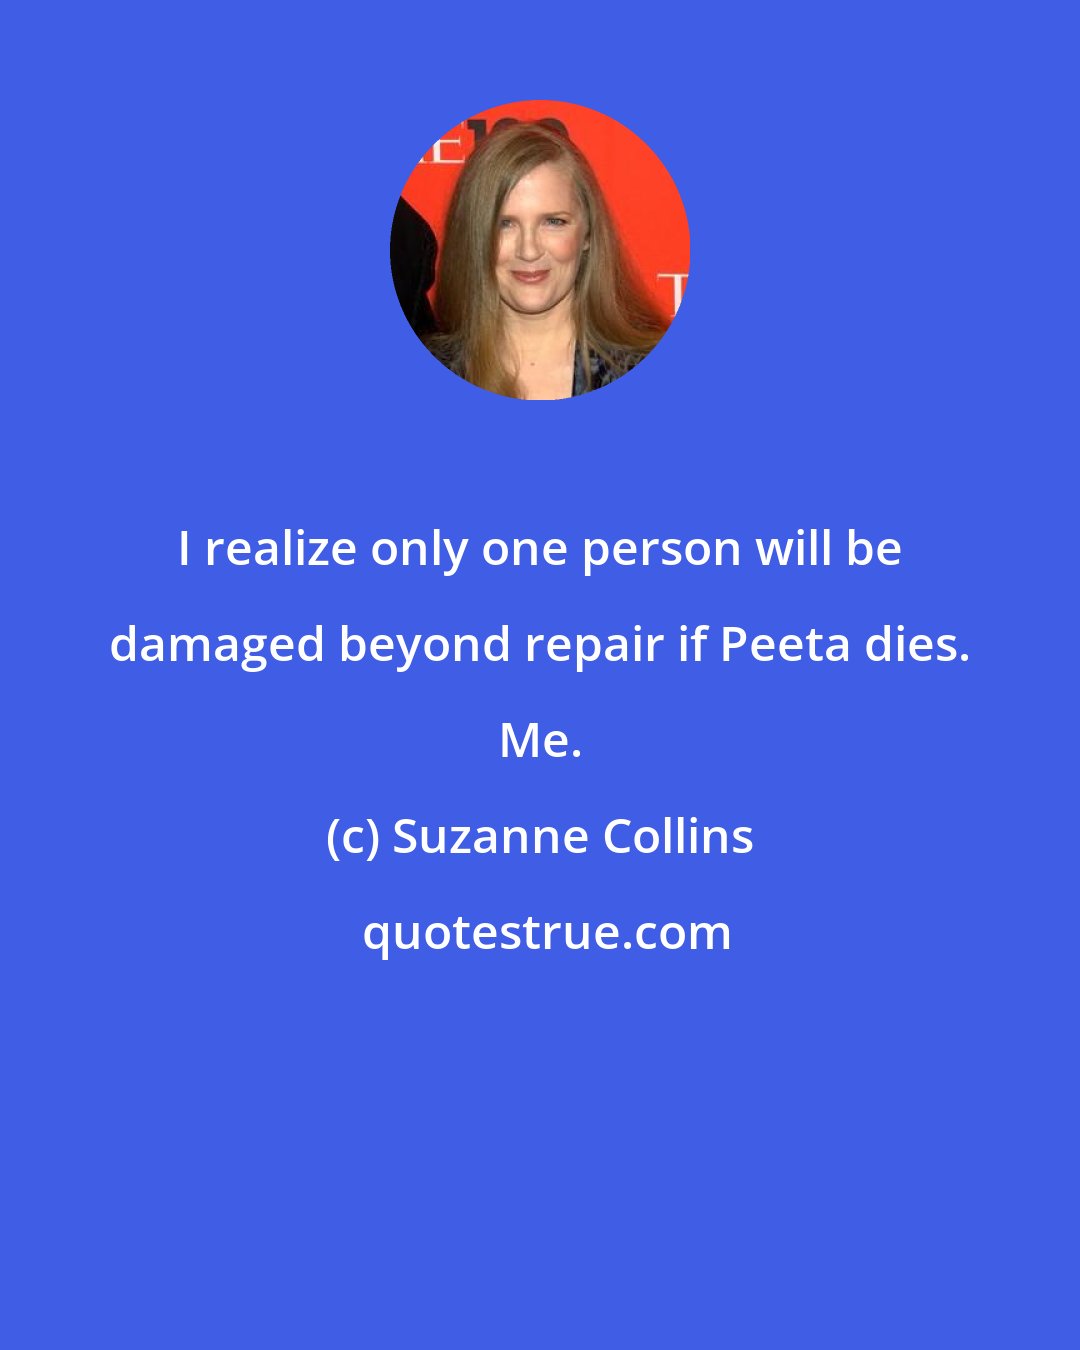 Suzanne Collins: I realize only one person will be damaged beyond repair if Peeta dies. Me.